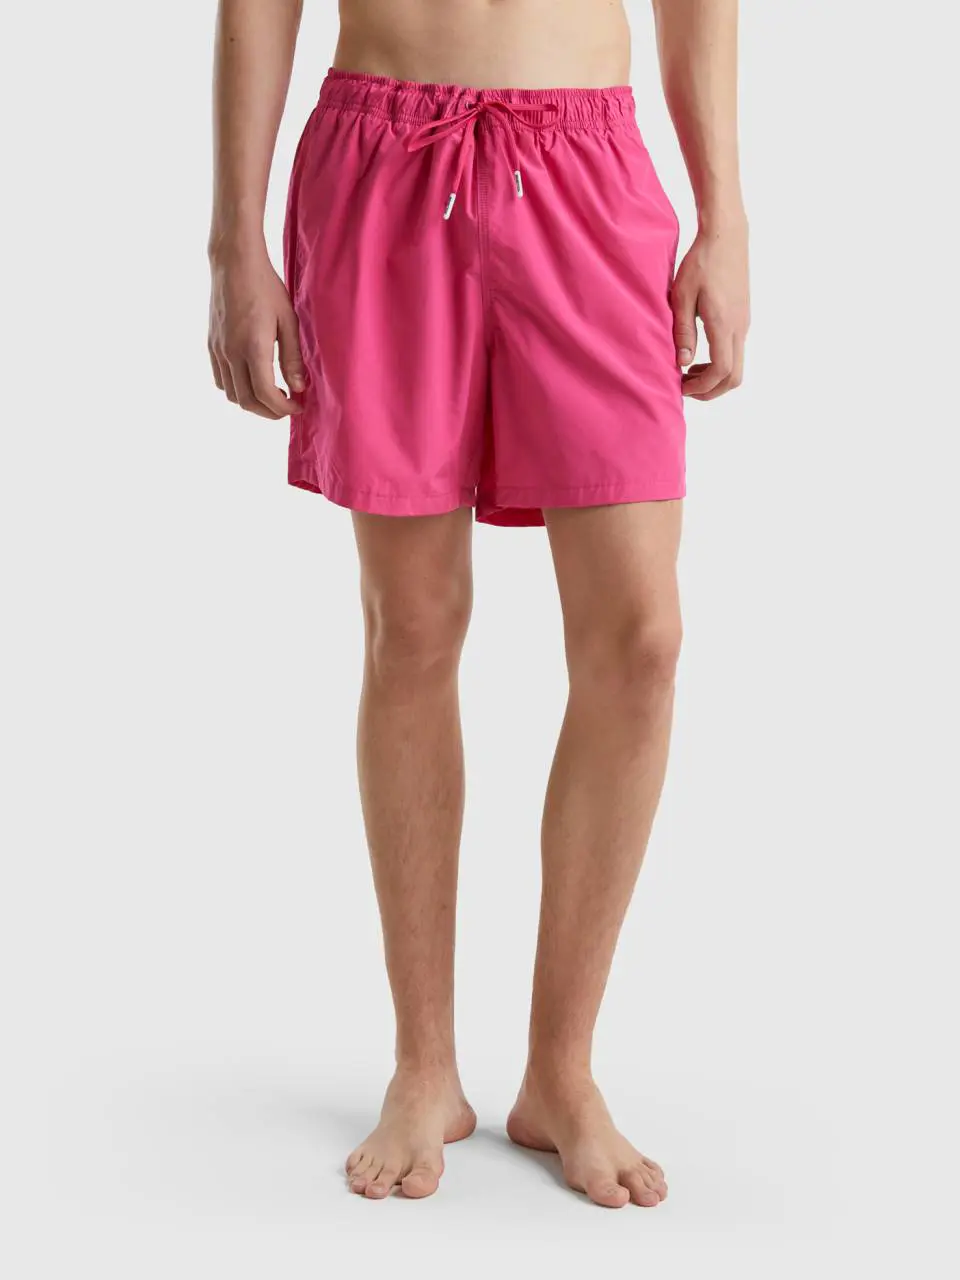 Benetton swim trunks in recycled cotton blend. 1